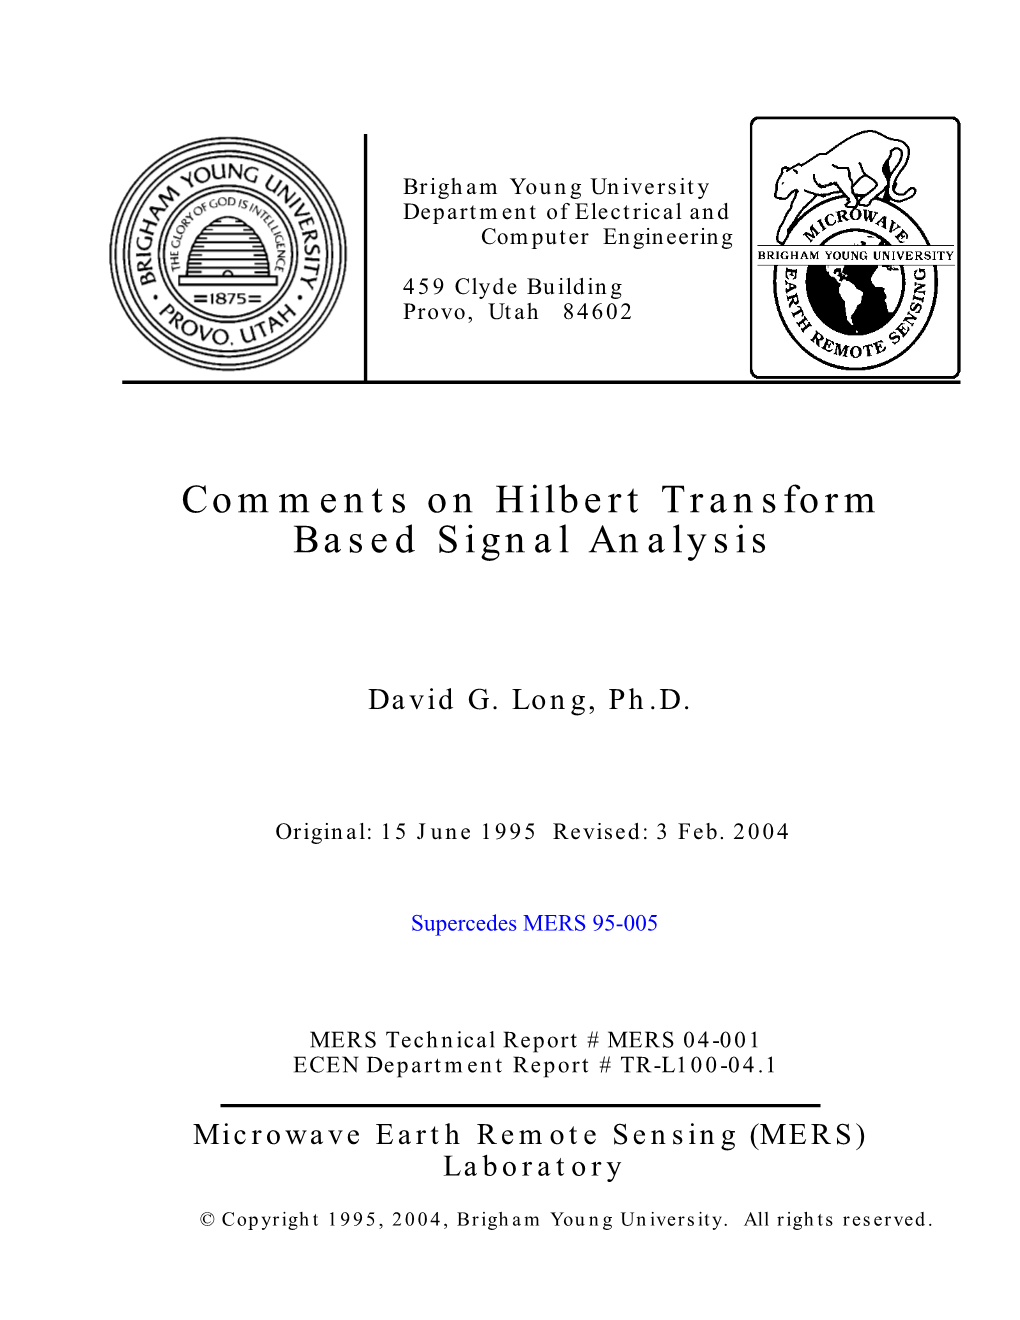 Comments on Hilbert Transform Based Signal Analysis